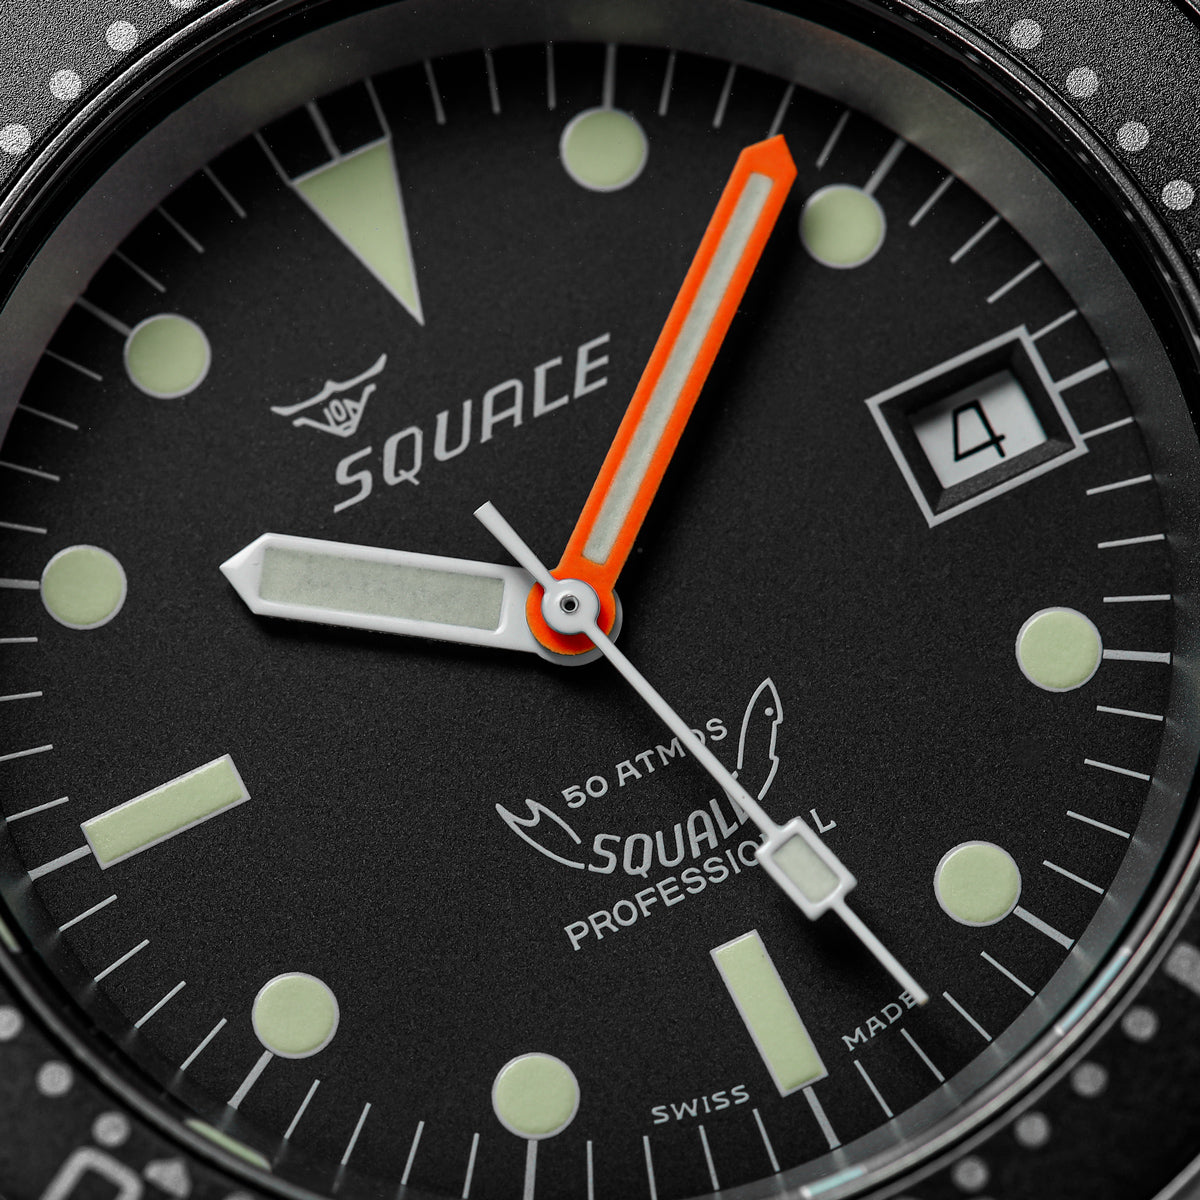 Squale 1521 Swiss Made Diver's Watch Black Dial Polished Case – Rubber